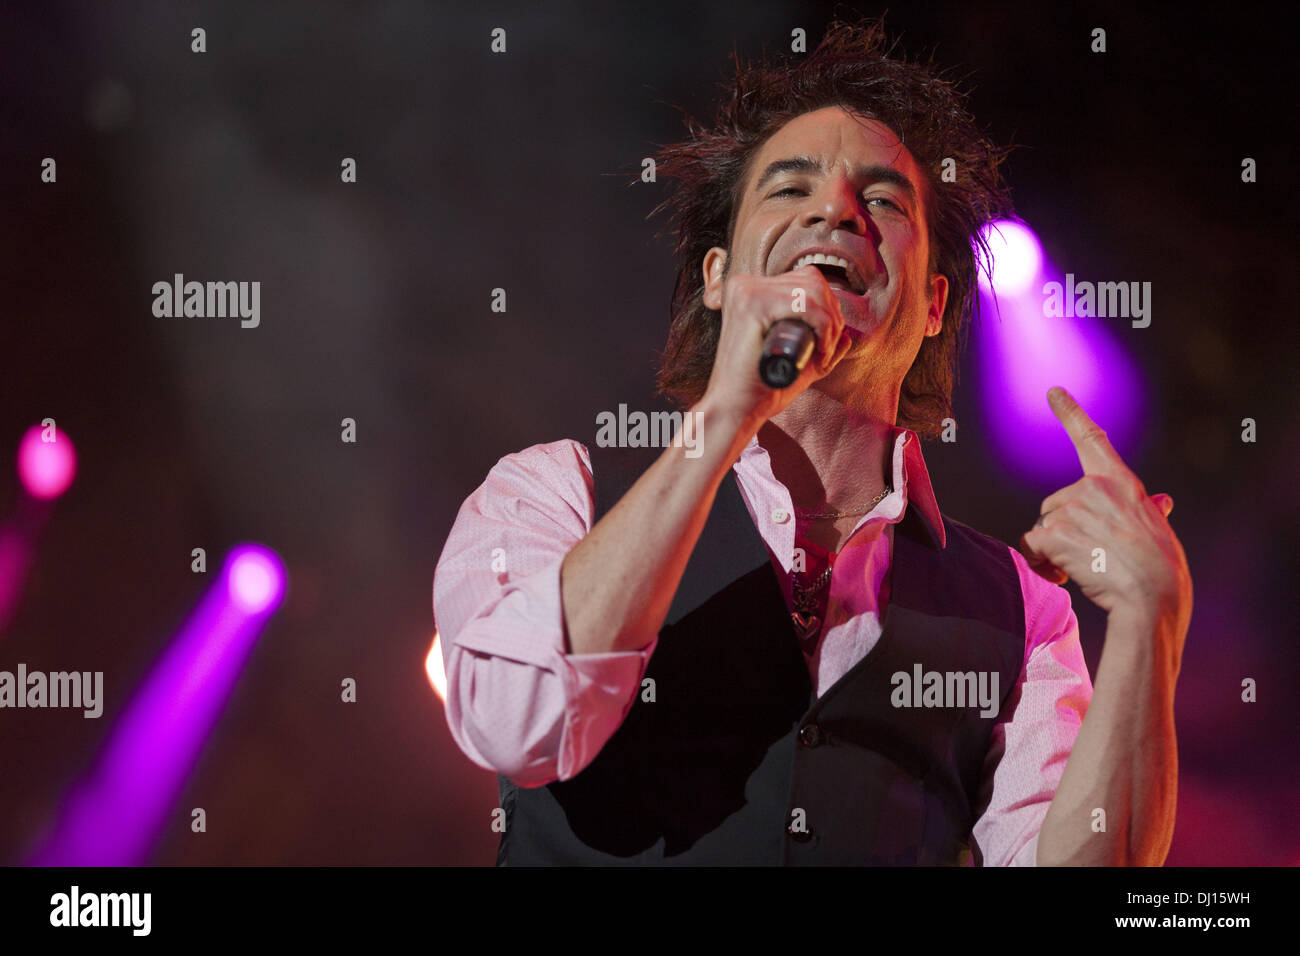 Chicago, Illinois, USA. 20th Aug, 2011. Vocalist PAT MONAHAN of Train performs at Charter One Pavilion on Northerly Island in Chicago, Illinois © Daniel DeSlover/ZUMAPRESS.com/Alamy Live News Stock Photo